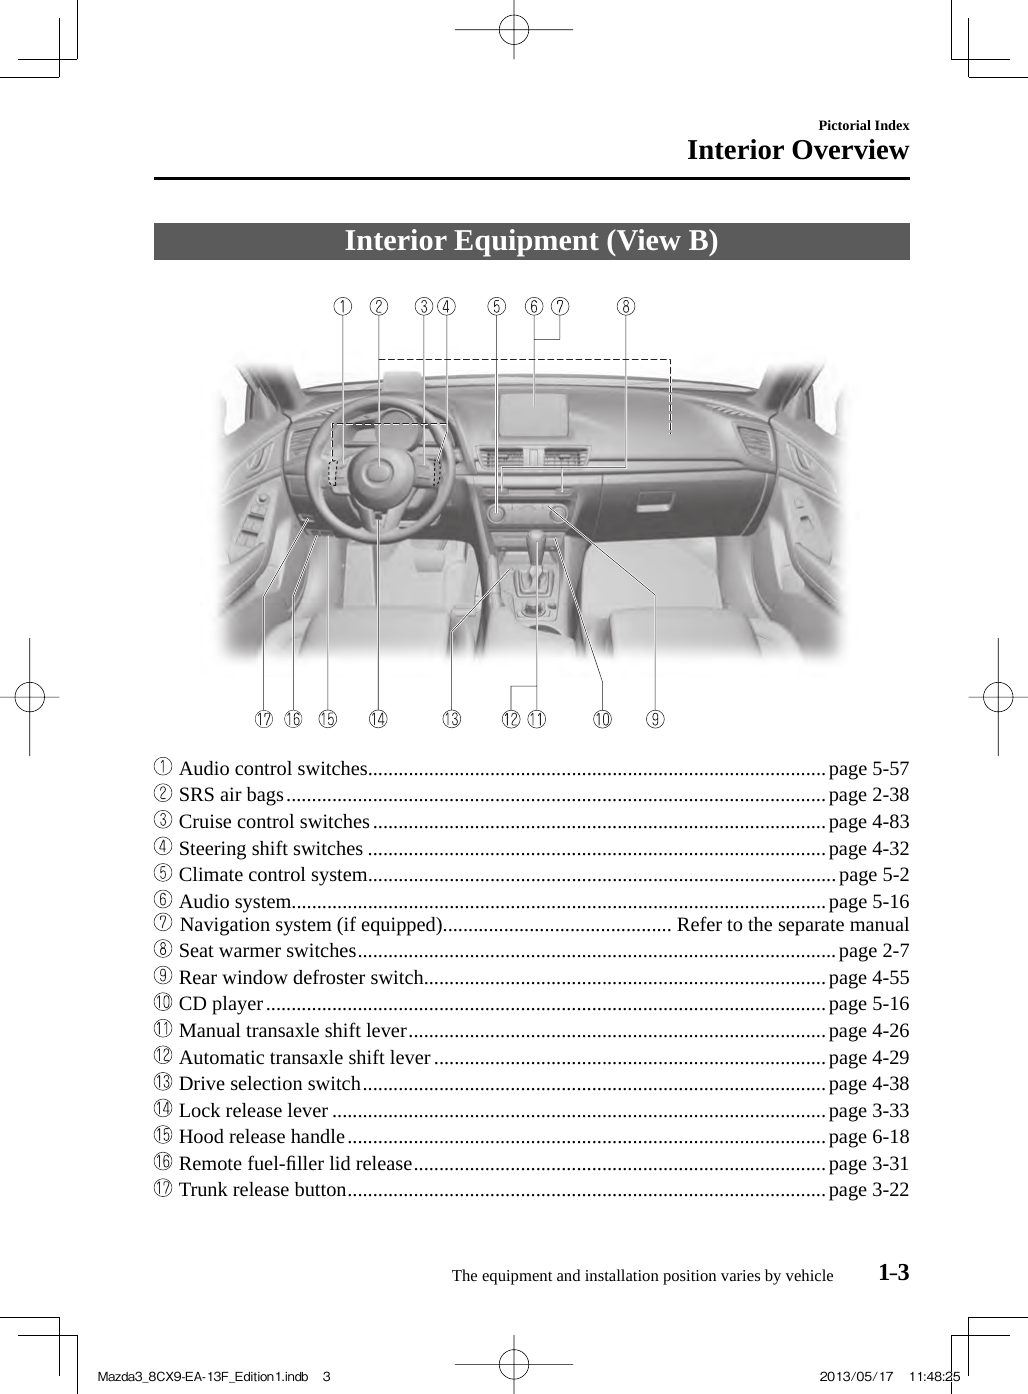 The equipment and installation position varies by vehicle 1–3Pictorial IndexInterior Overview Interior Equipment (View B)          Audio control switches..........................................................................................page  5-57     SRS air bags ..........................................................................................................page  2-38     Cruise control switches .........................................................................................page  4-83     Steering shift switches ..........................................................................................page  4-32     Climate control system............................................................................................page  5-2     Audio system.........................................................................................................page  5-16      Navigation system (if equipped)............................................. Refer to the separate manual     Seat warmer switches ..............................................................................................page  2-7     Rear window defroster switch...............................................................................page  4-55     CD player ..............................................................................................................page  5-16     Manual transaxle shift lever ..................................................................................page  4-26     Automatic transaxle shift lever .............................................................................page  4-29     Drive selection switch ...........................................................................................page  4-38     Lock release lever .................................................................................................page  3-33     Hood release handle ..............................................................................................page  6-18     Remote fuel-ﬁ ller lid release .................................................................................page  3-31     Trunk release button ..............................................................................................page  3-22 Mazda3_8CX9-EA-13F_Edition1.indb   3Mazda3_8CX9-EA-13F_Edition1.indb   3 2013/05/17   11:48:252013/05/17   11:48:25